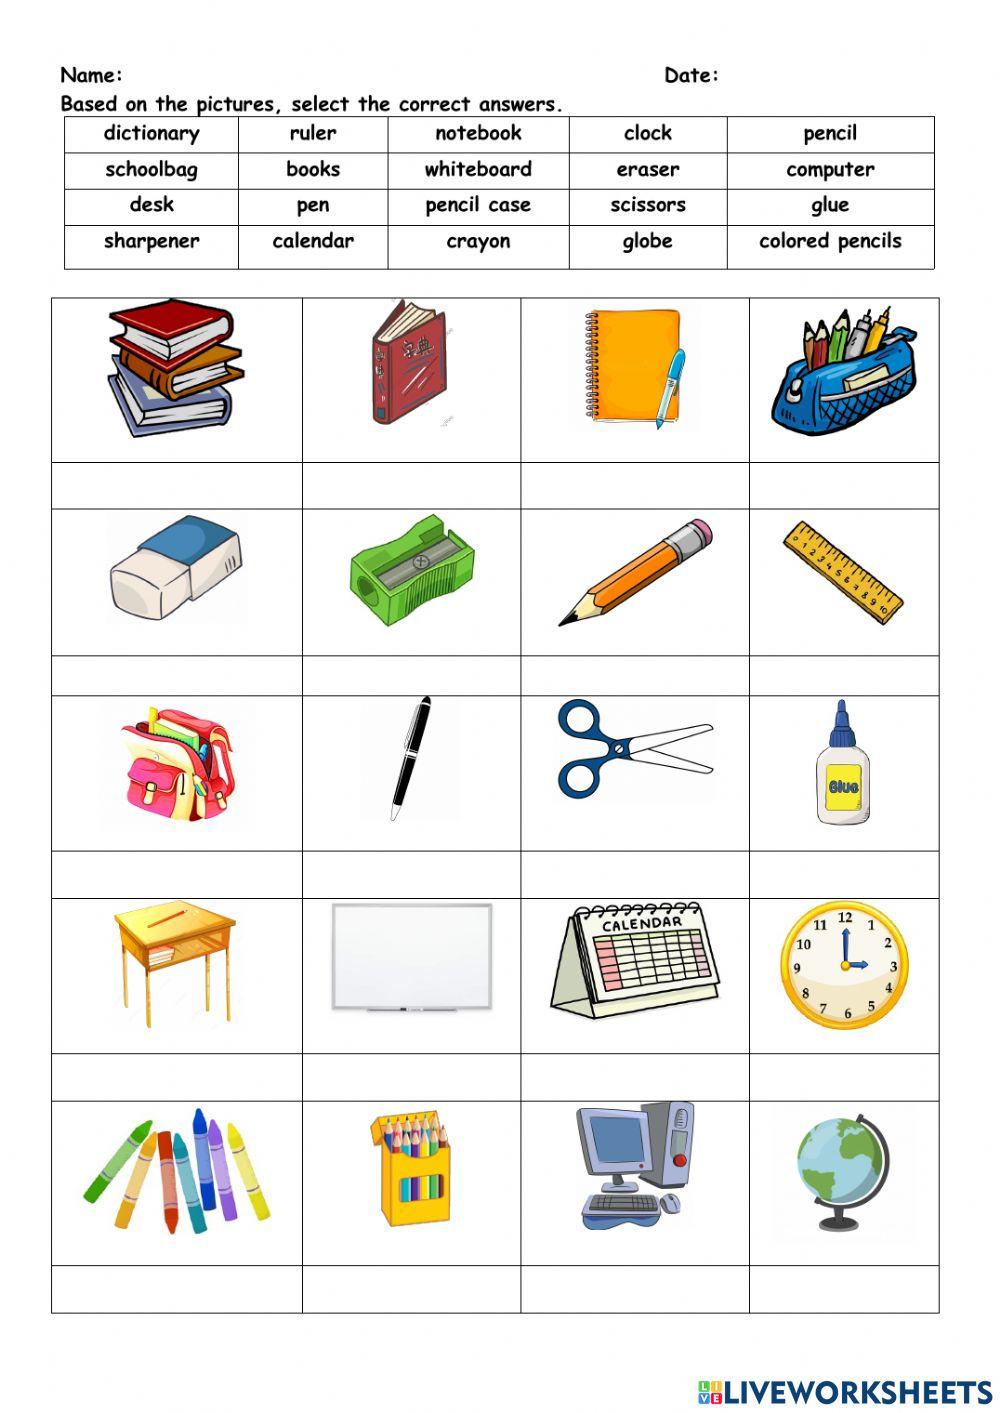 Classroom objects picture dictionary